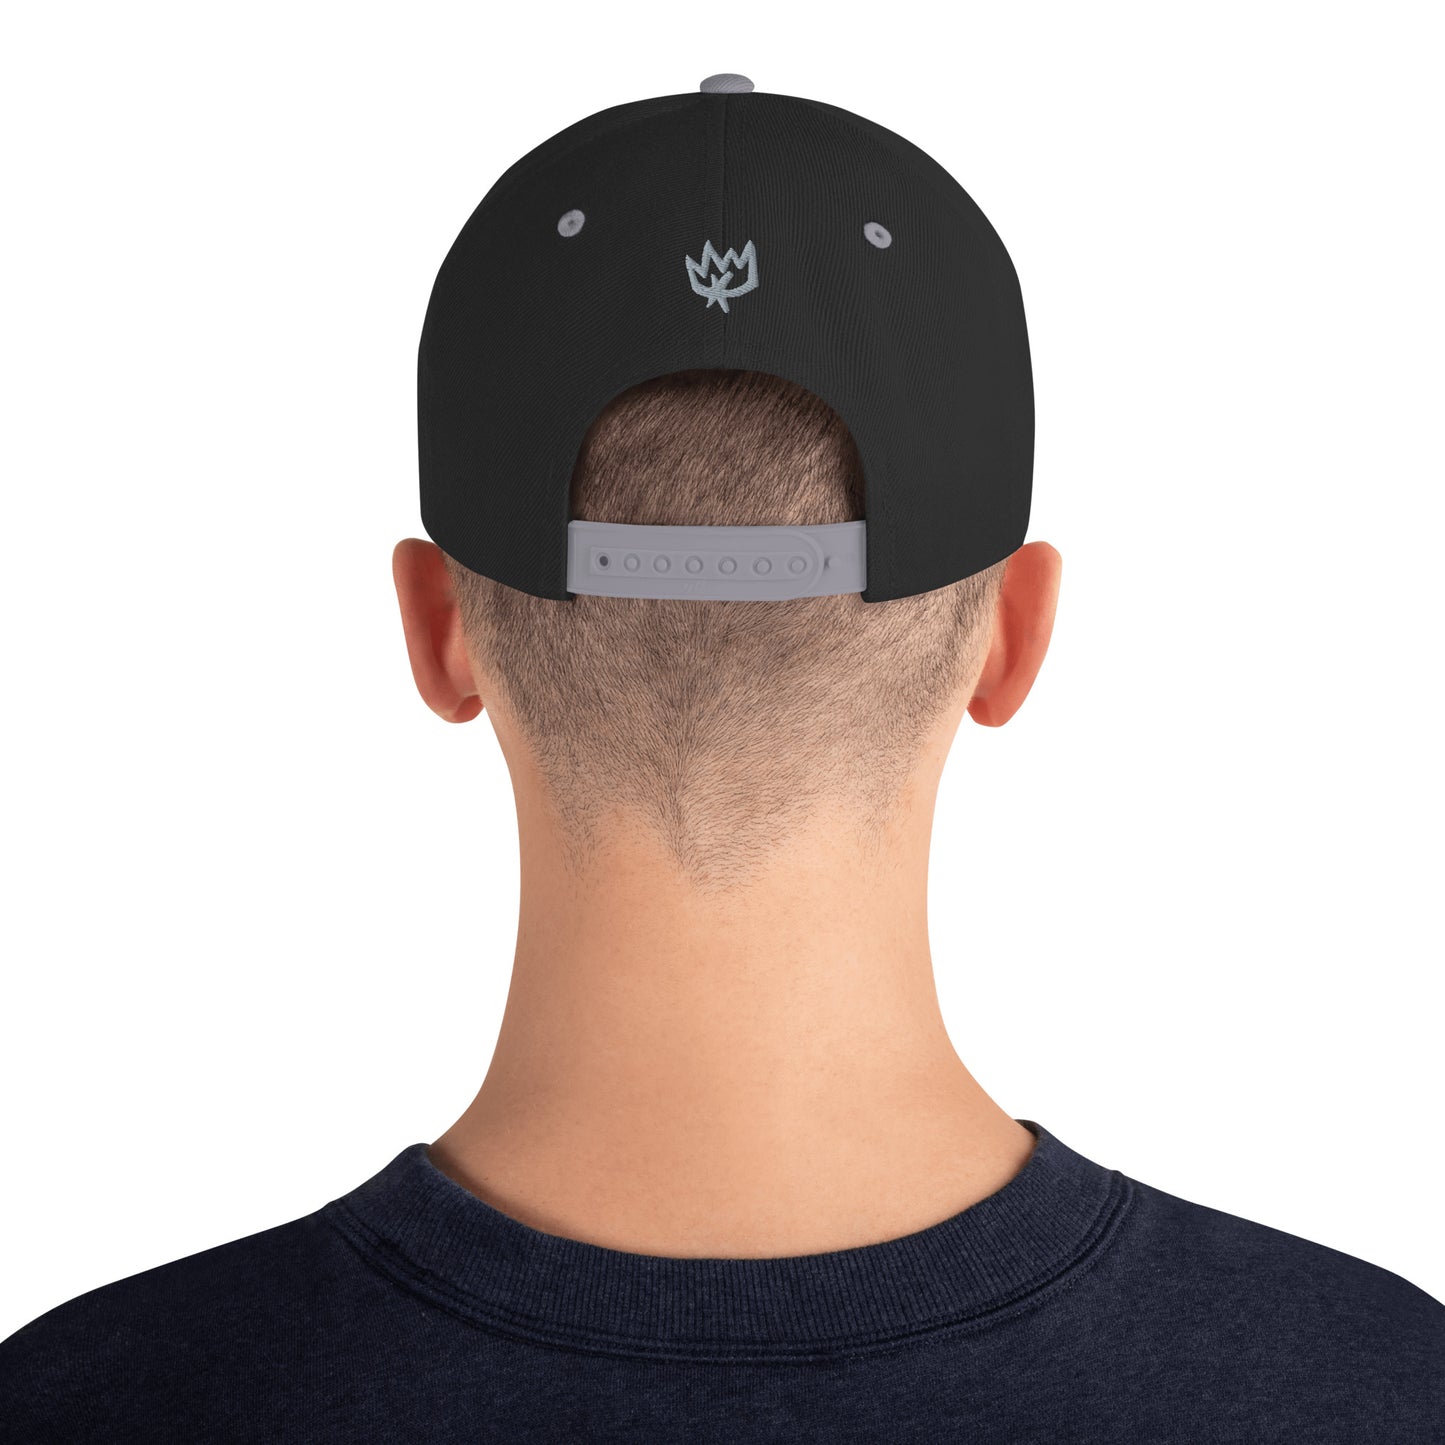 Black and Gray Crown Snapback Hat